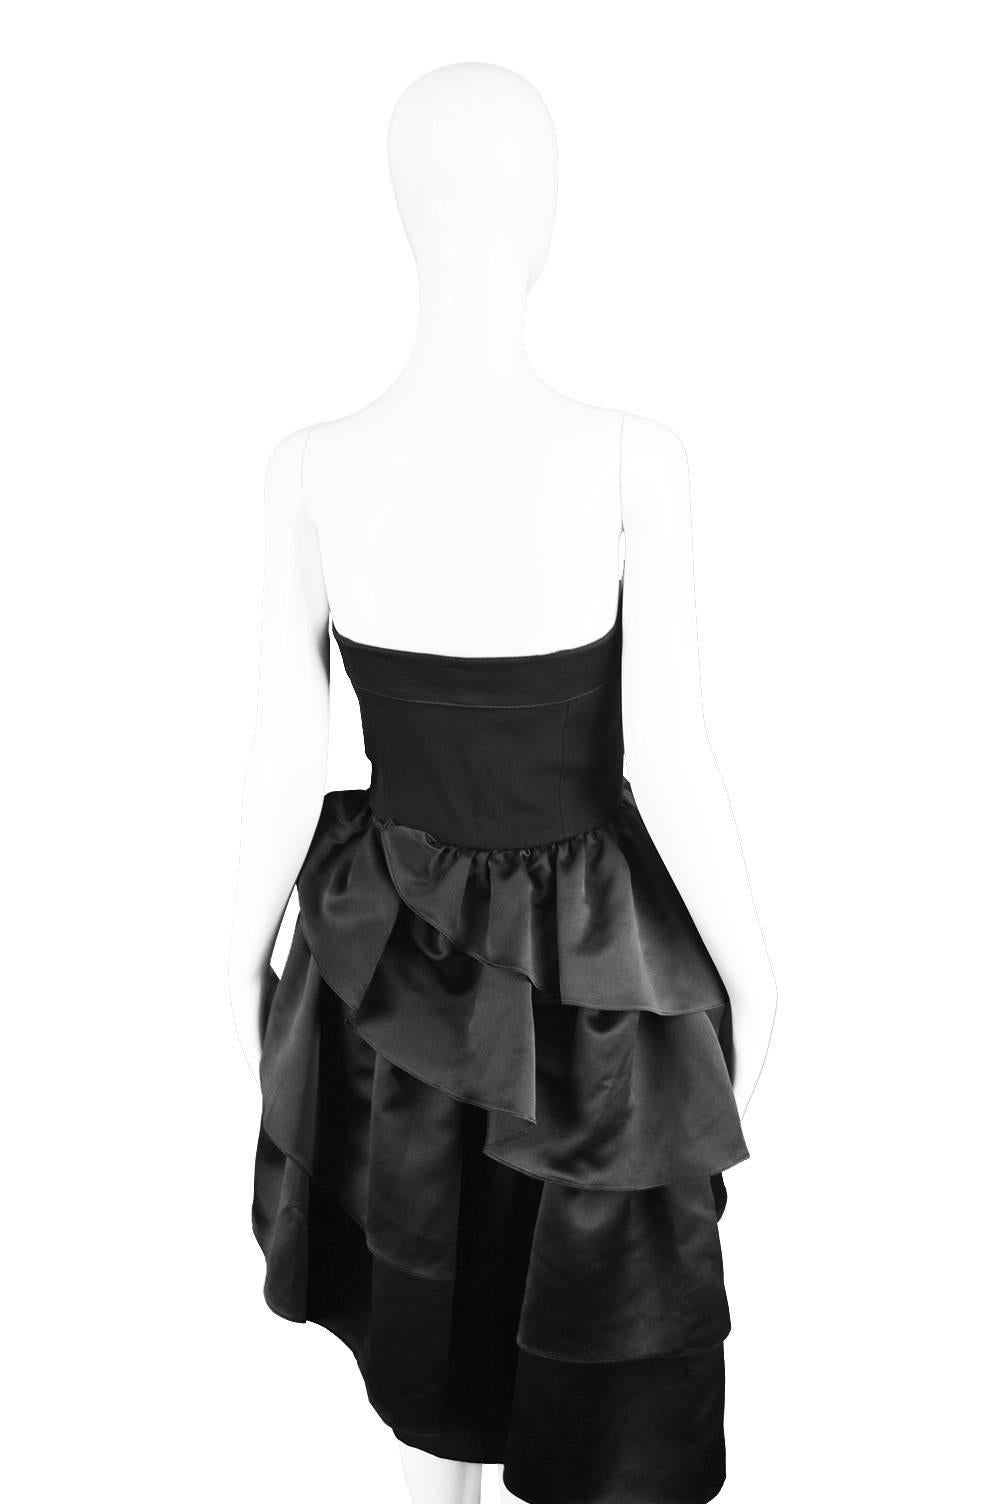 Louis Feraud Documented Vintage 1987 Strapless Satin Cocktail Party Dress 1